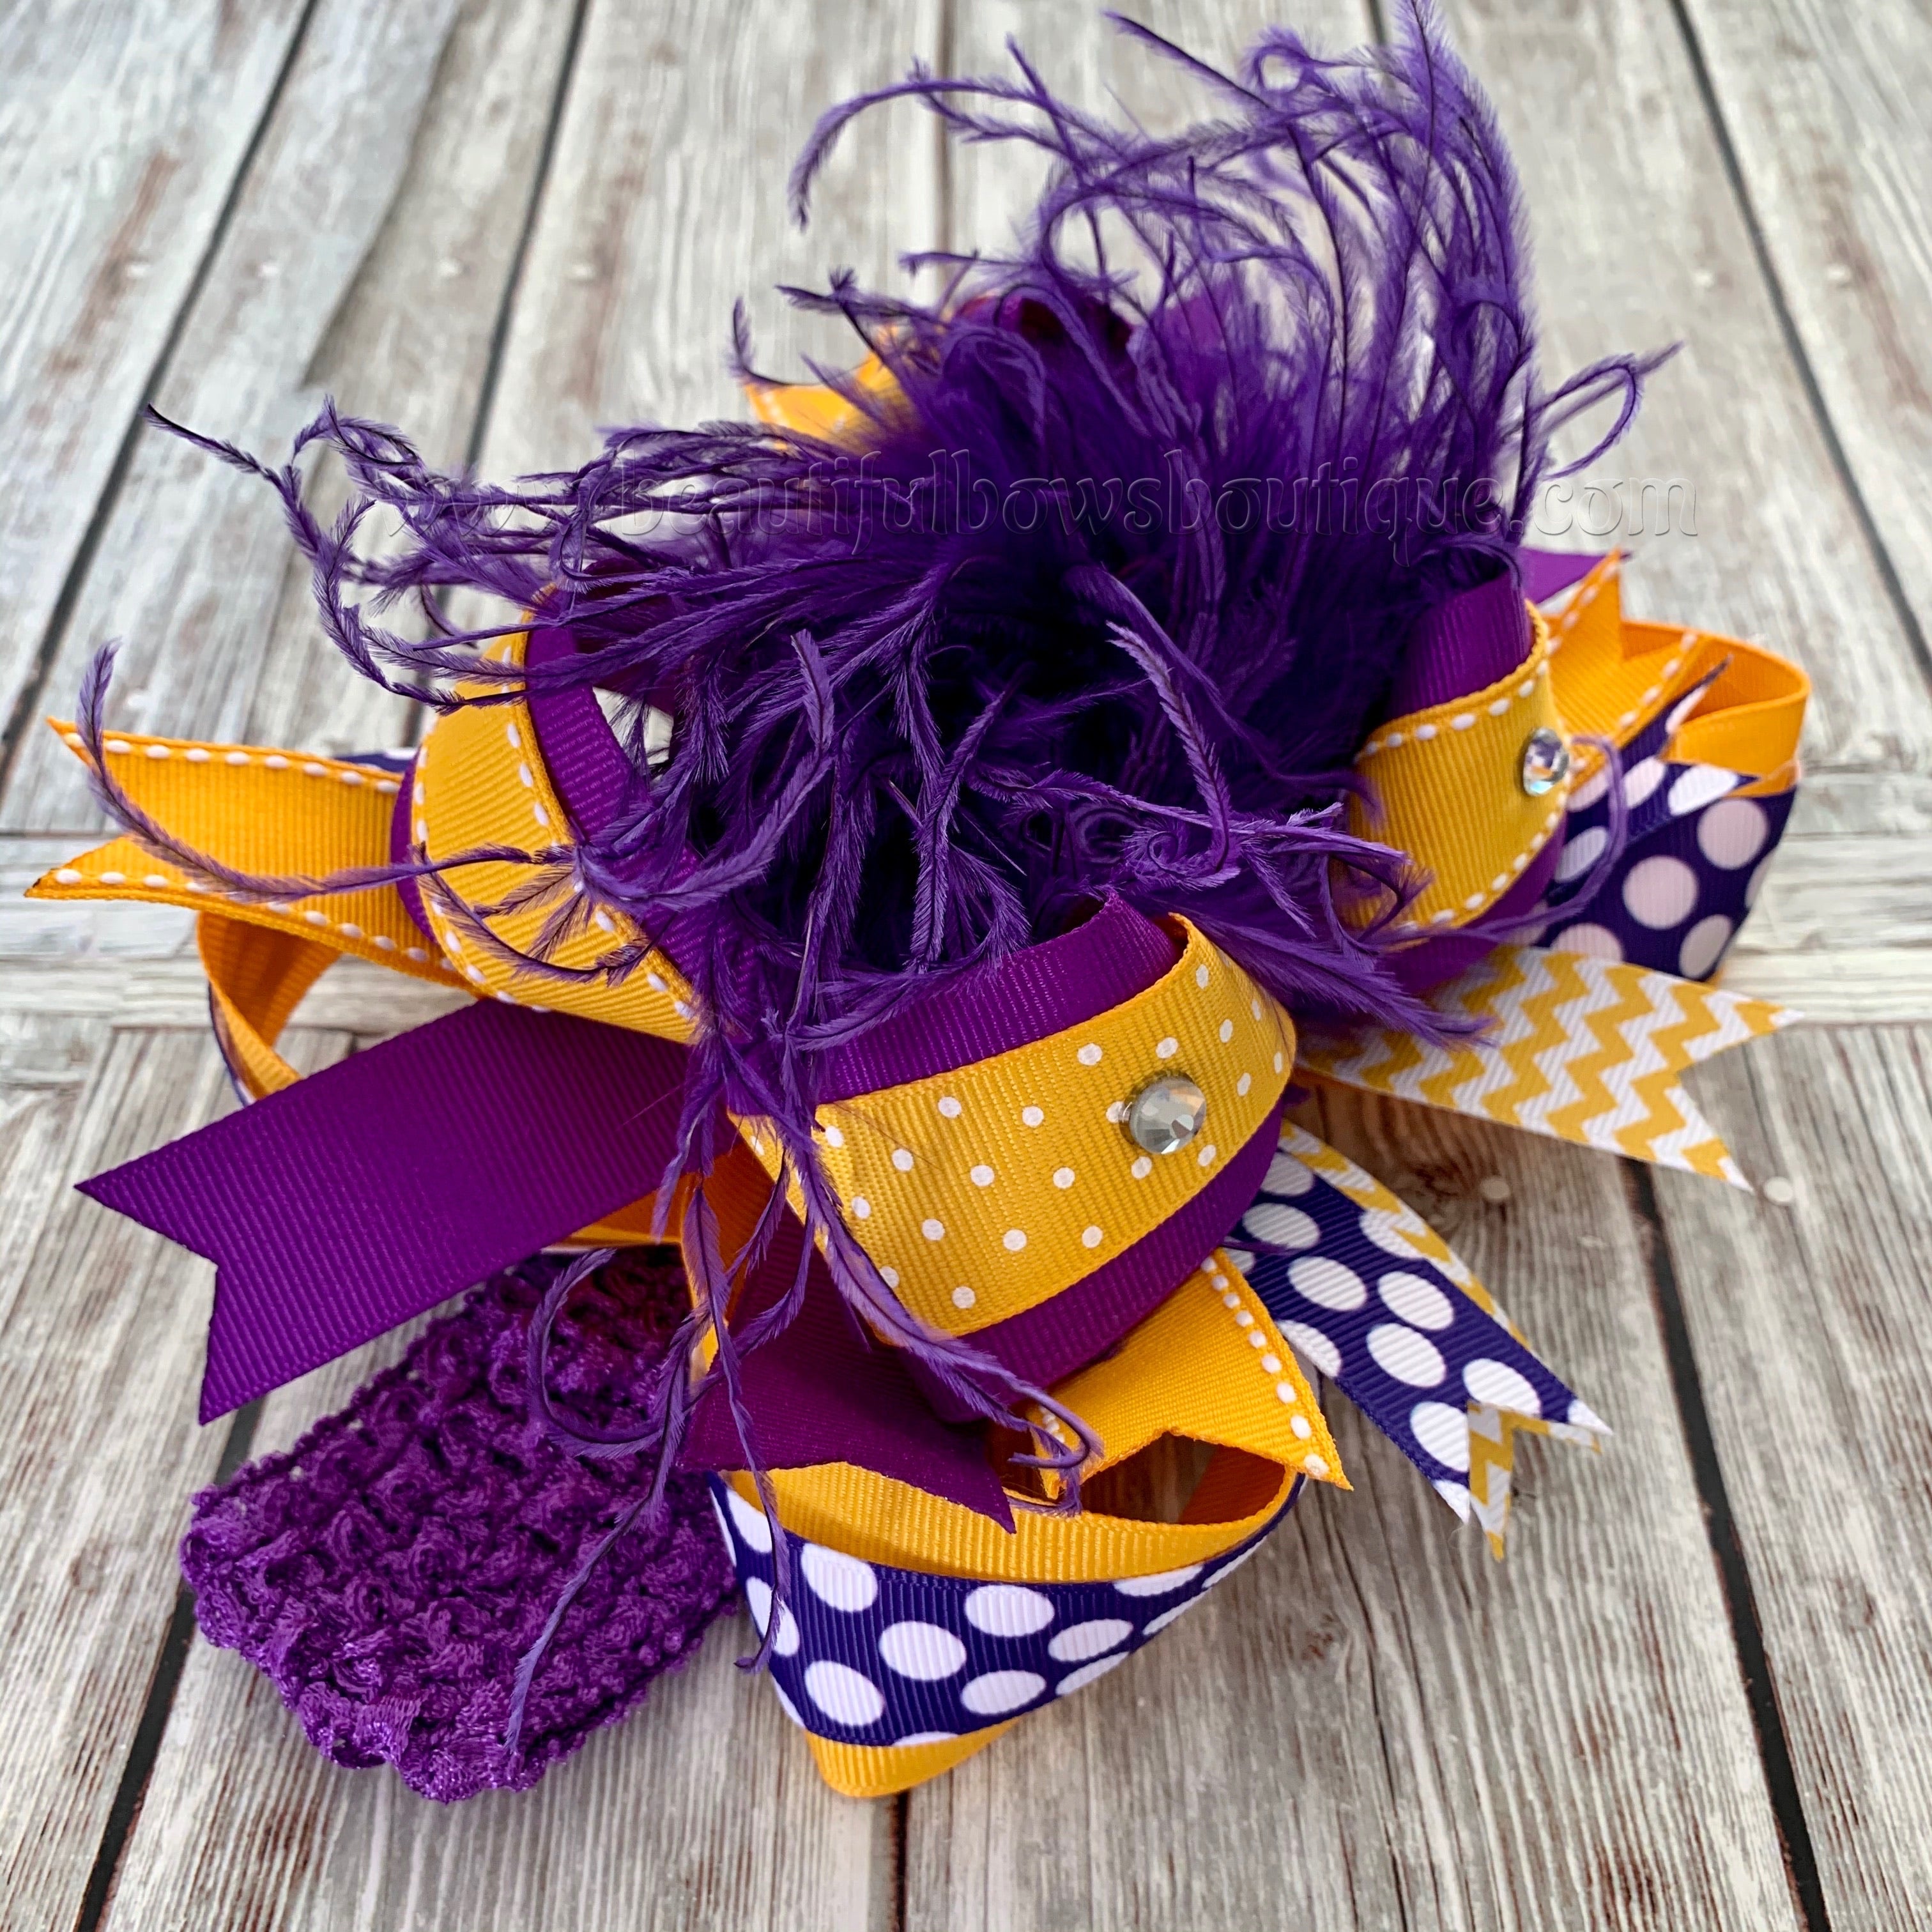 Handmade Boutique Lavender Hair Bow Headband for Girls Babies 6 inch (Shown) / Alligator Clip Only